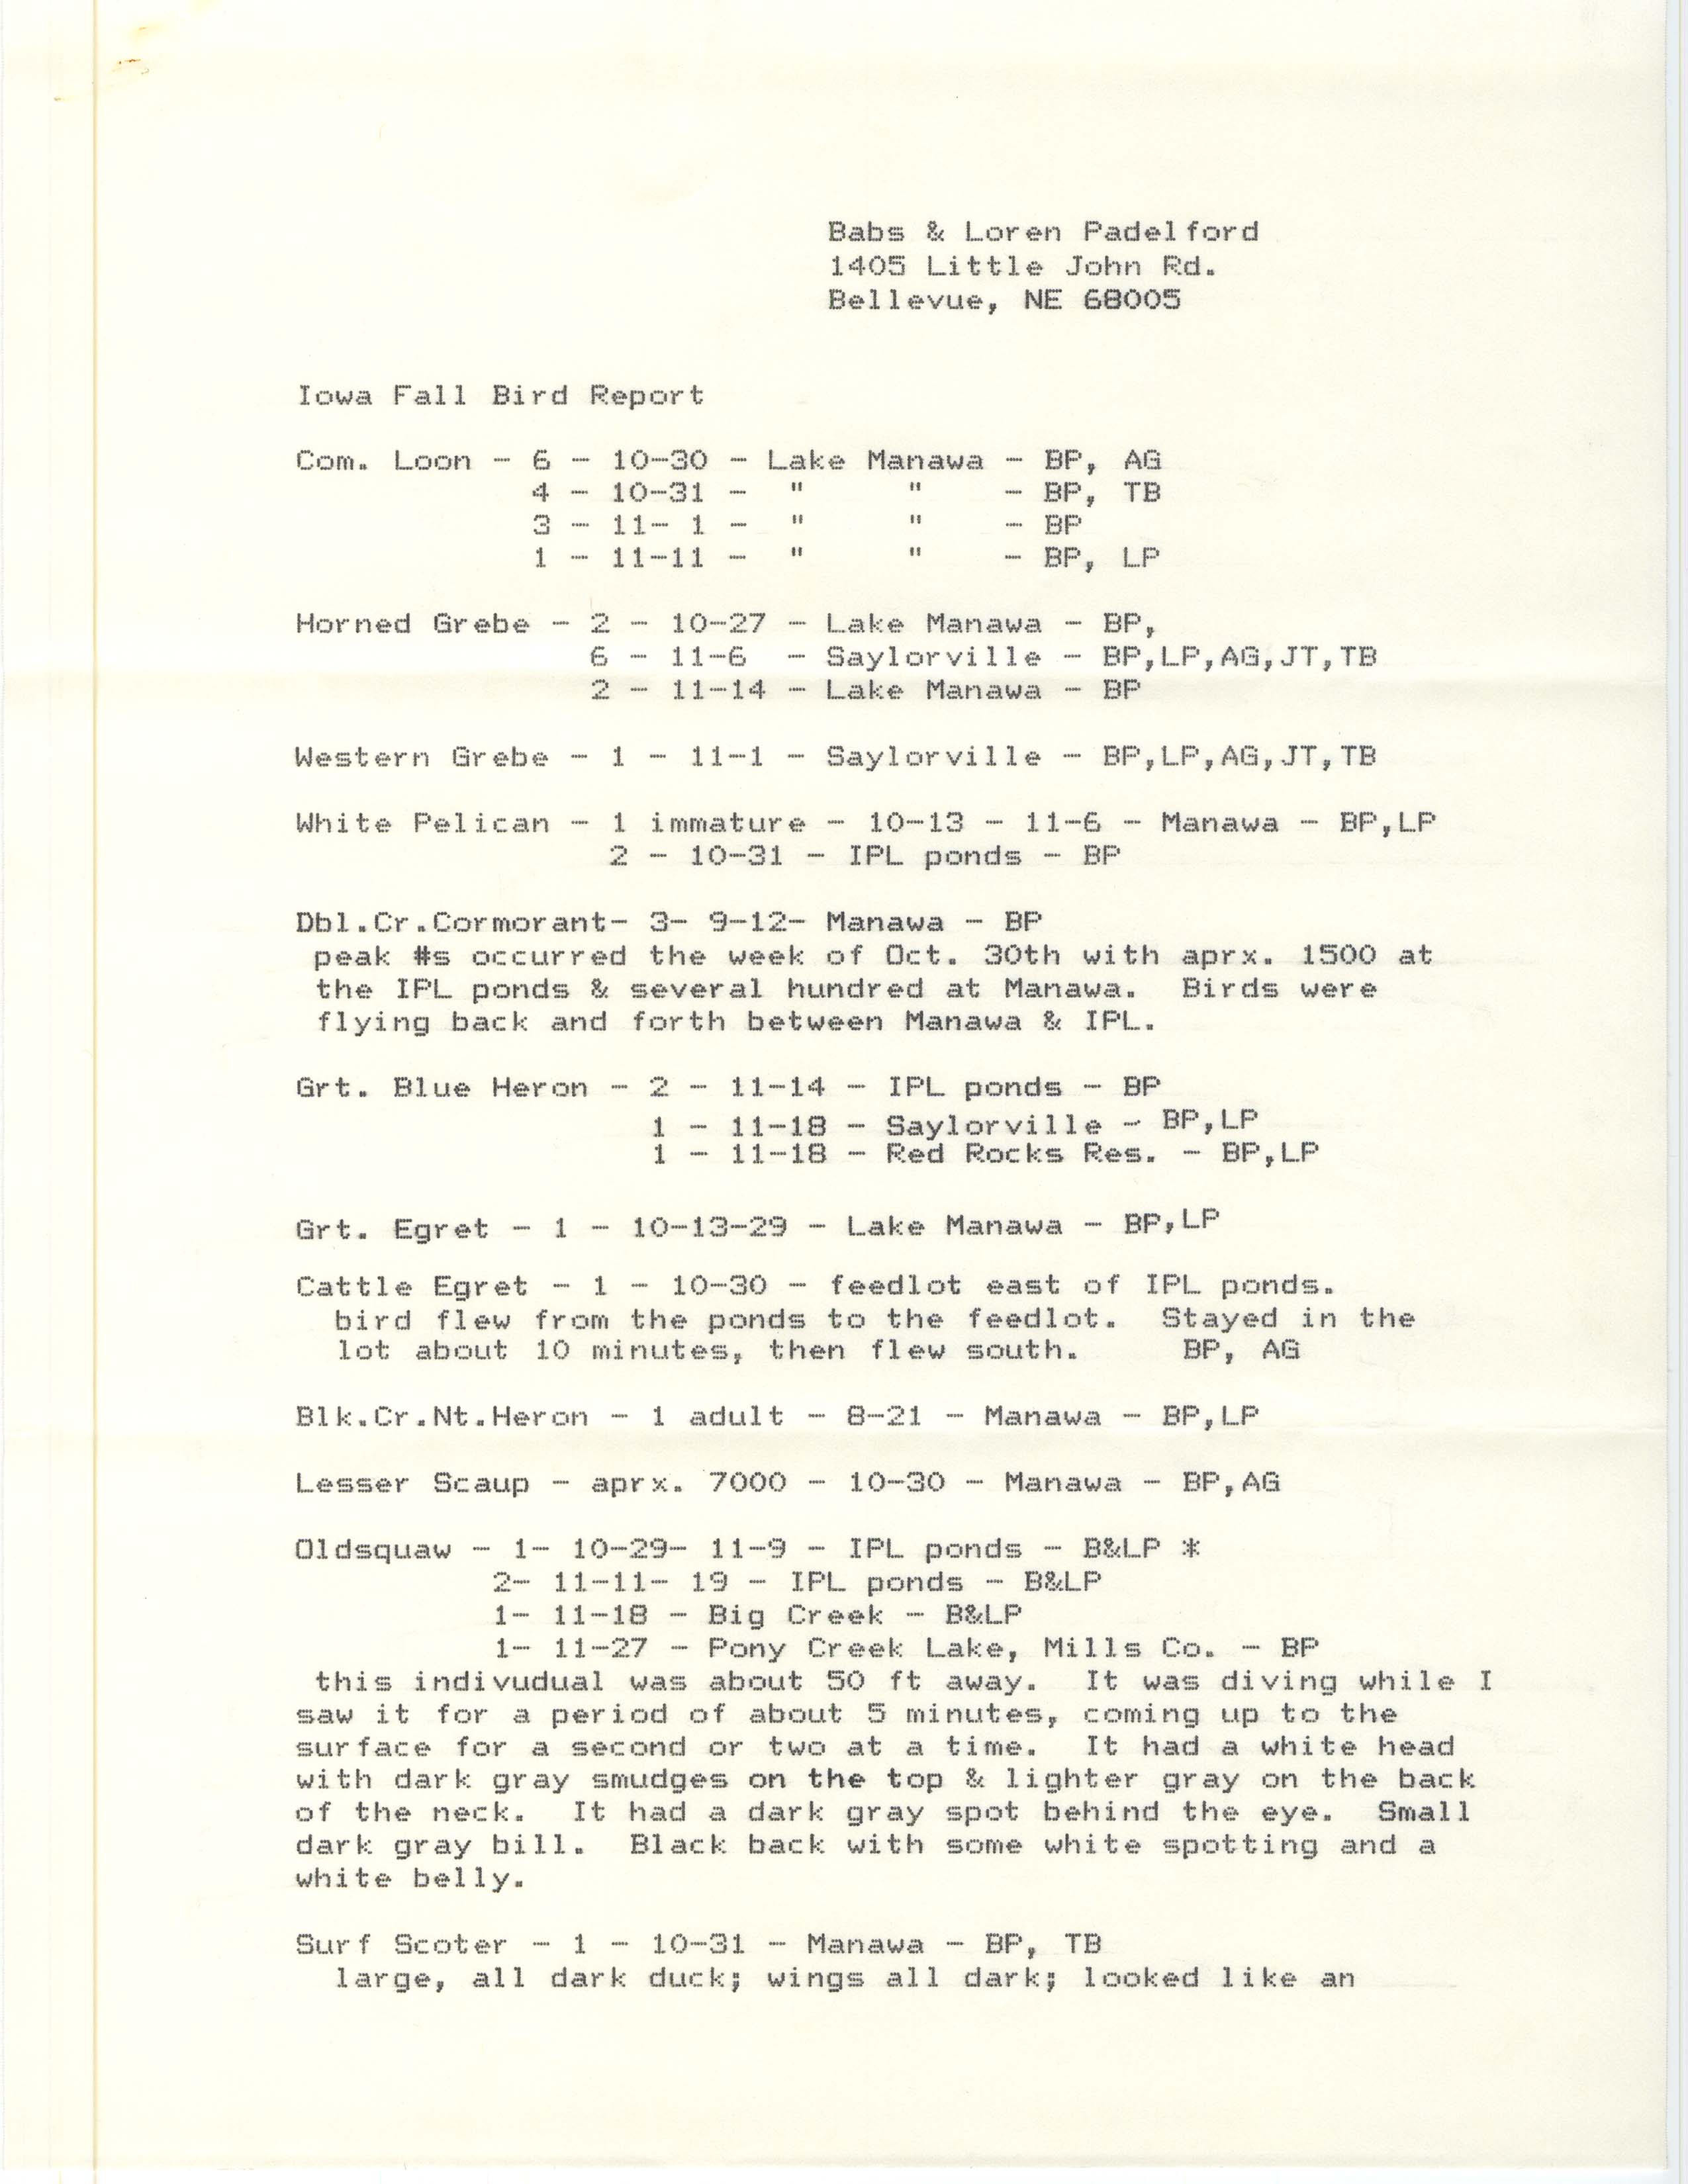 Field reports, Babs and Loren Padelford, fall 1989